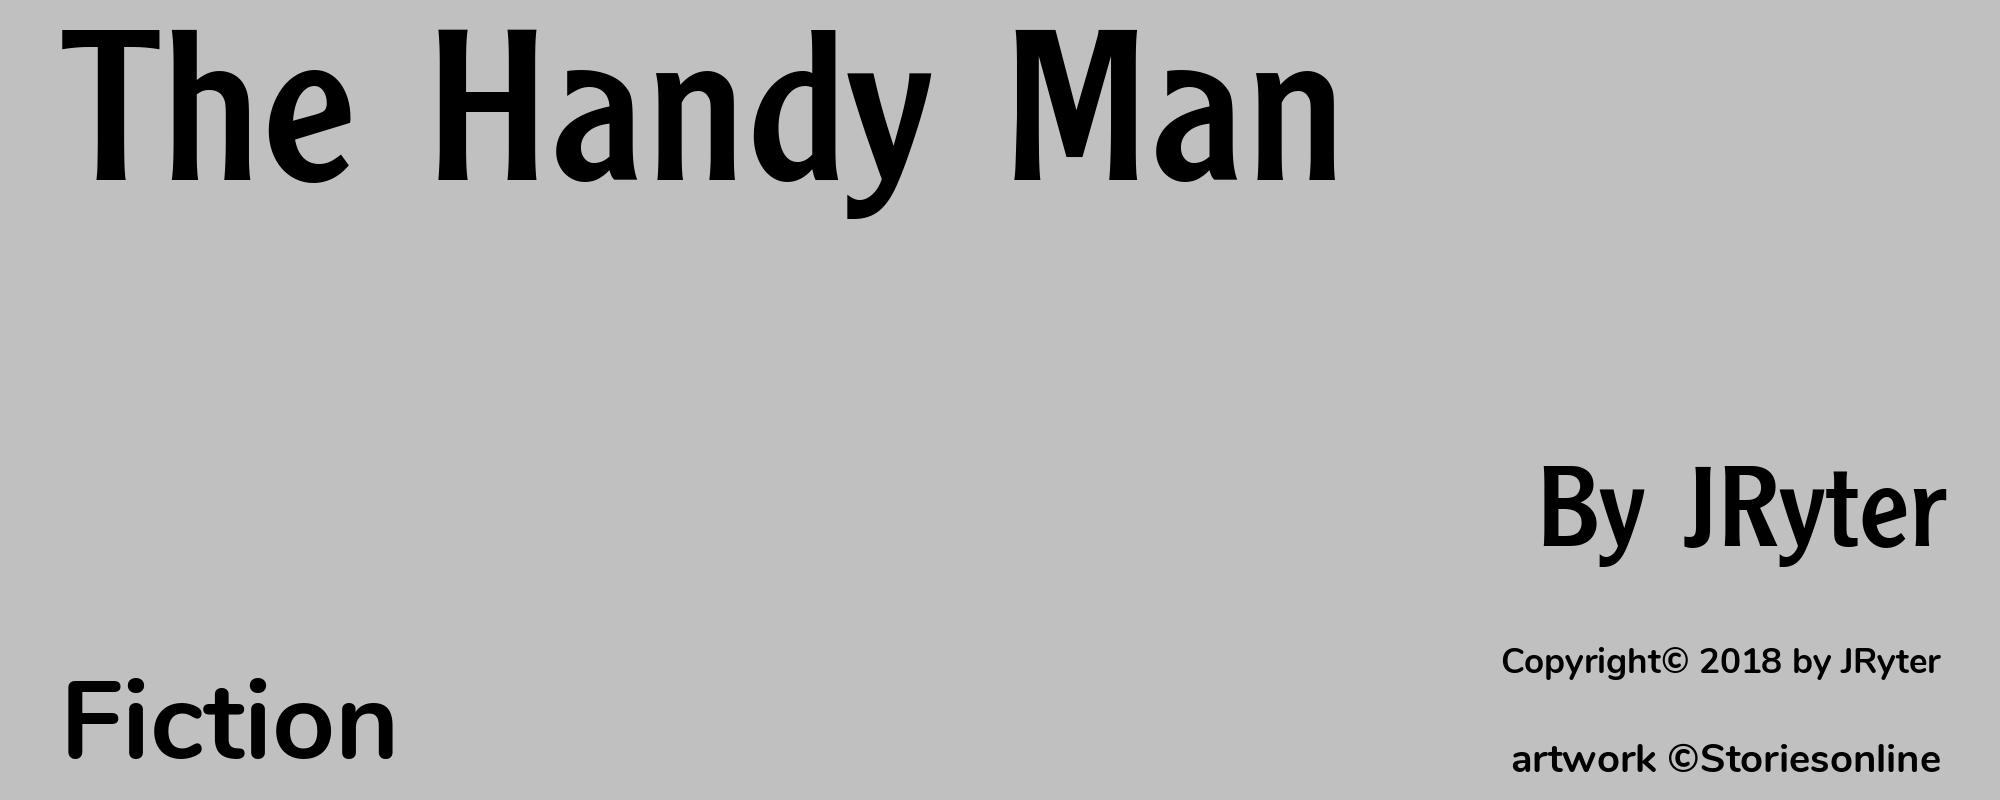 The Handy Man - Cover